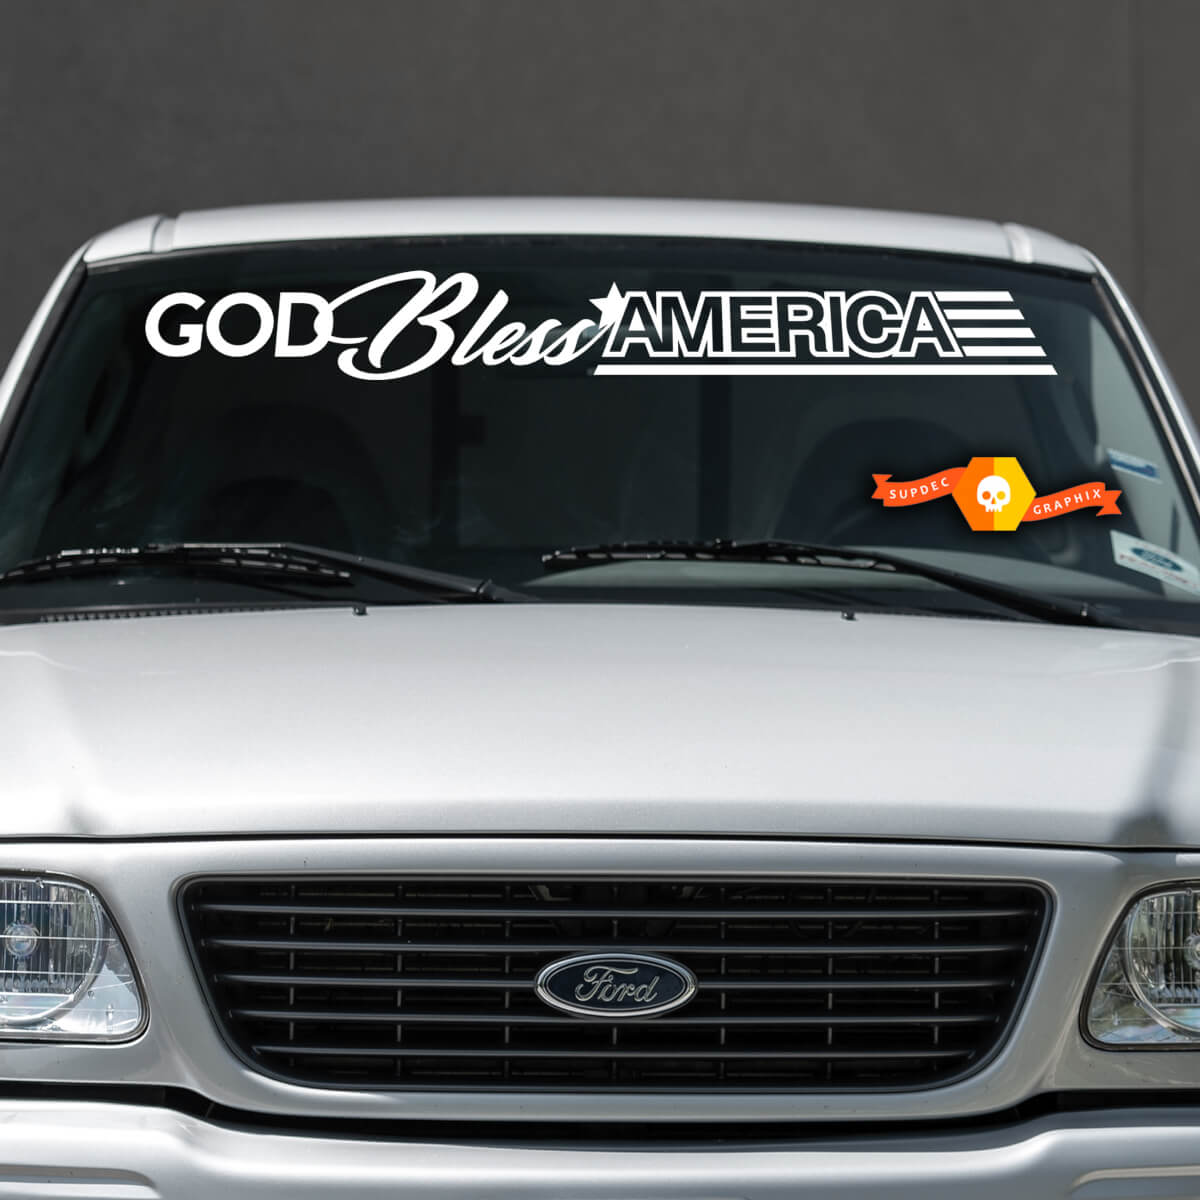 God Bless America Nissan Ford Chevrolet Jeep Car Windshield Decal Sticker Graphics Fits To Any Models